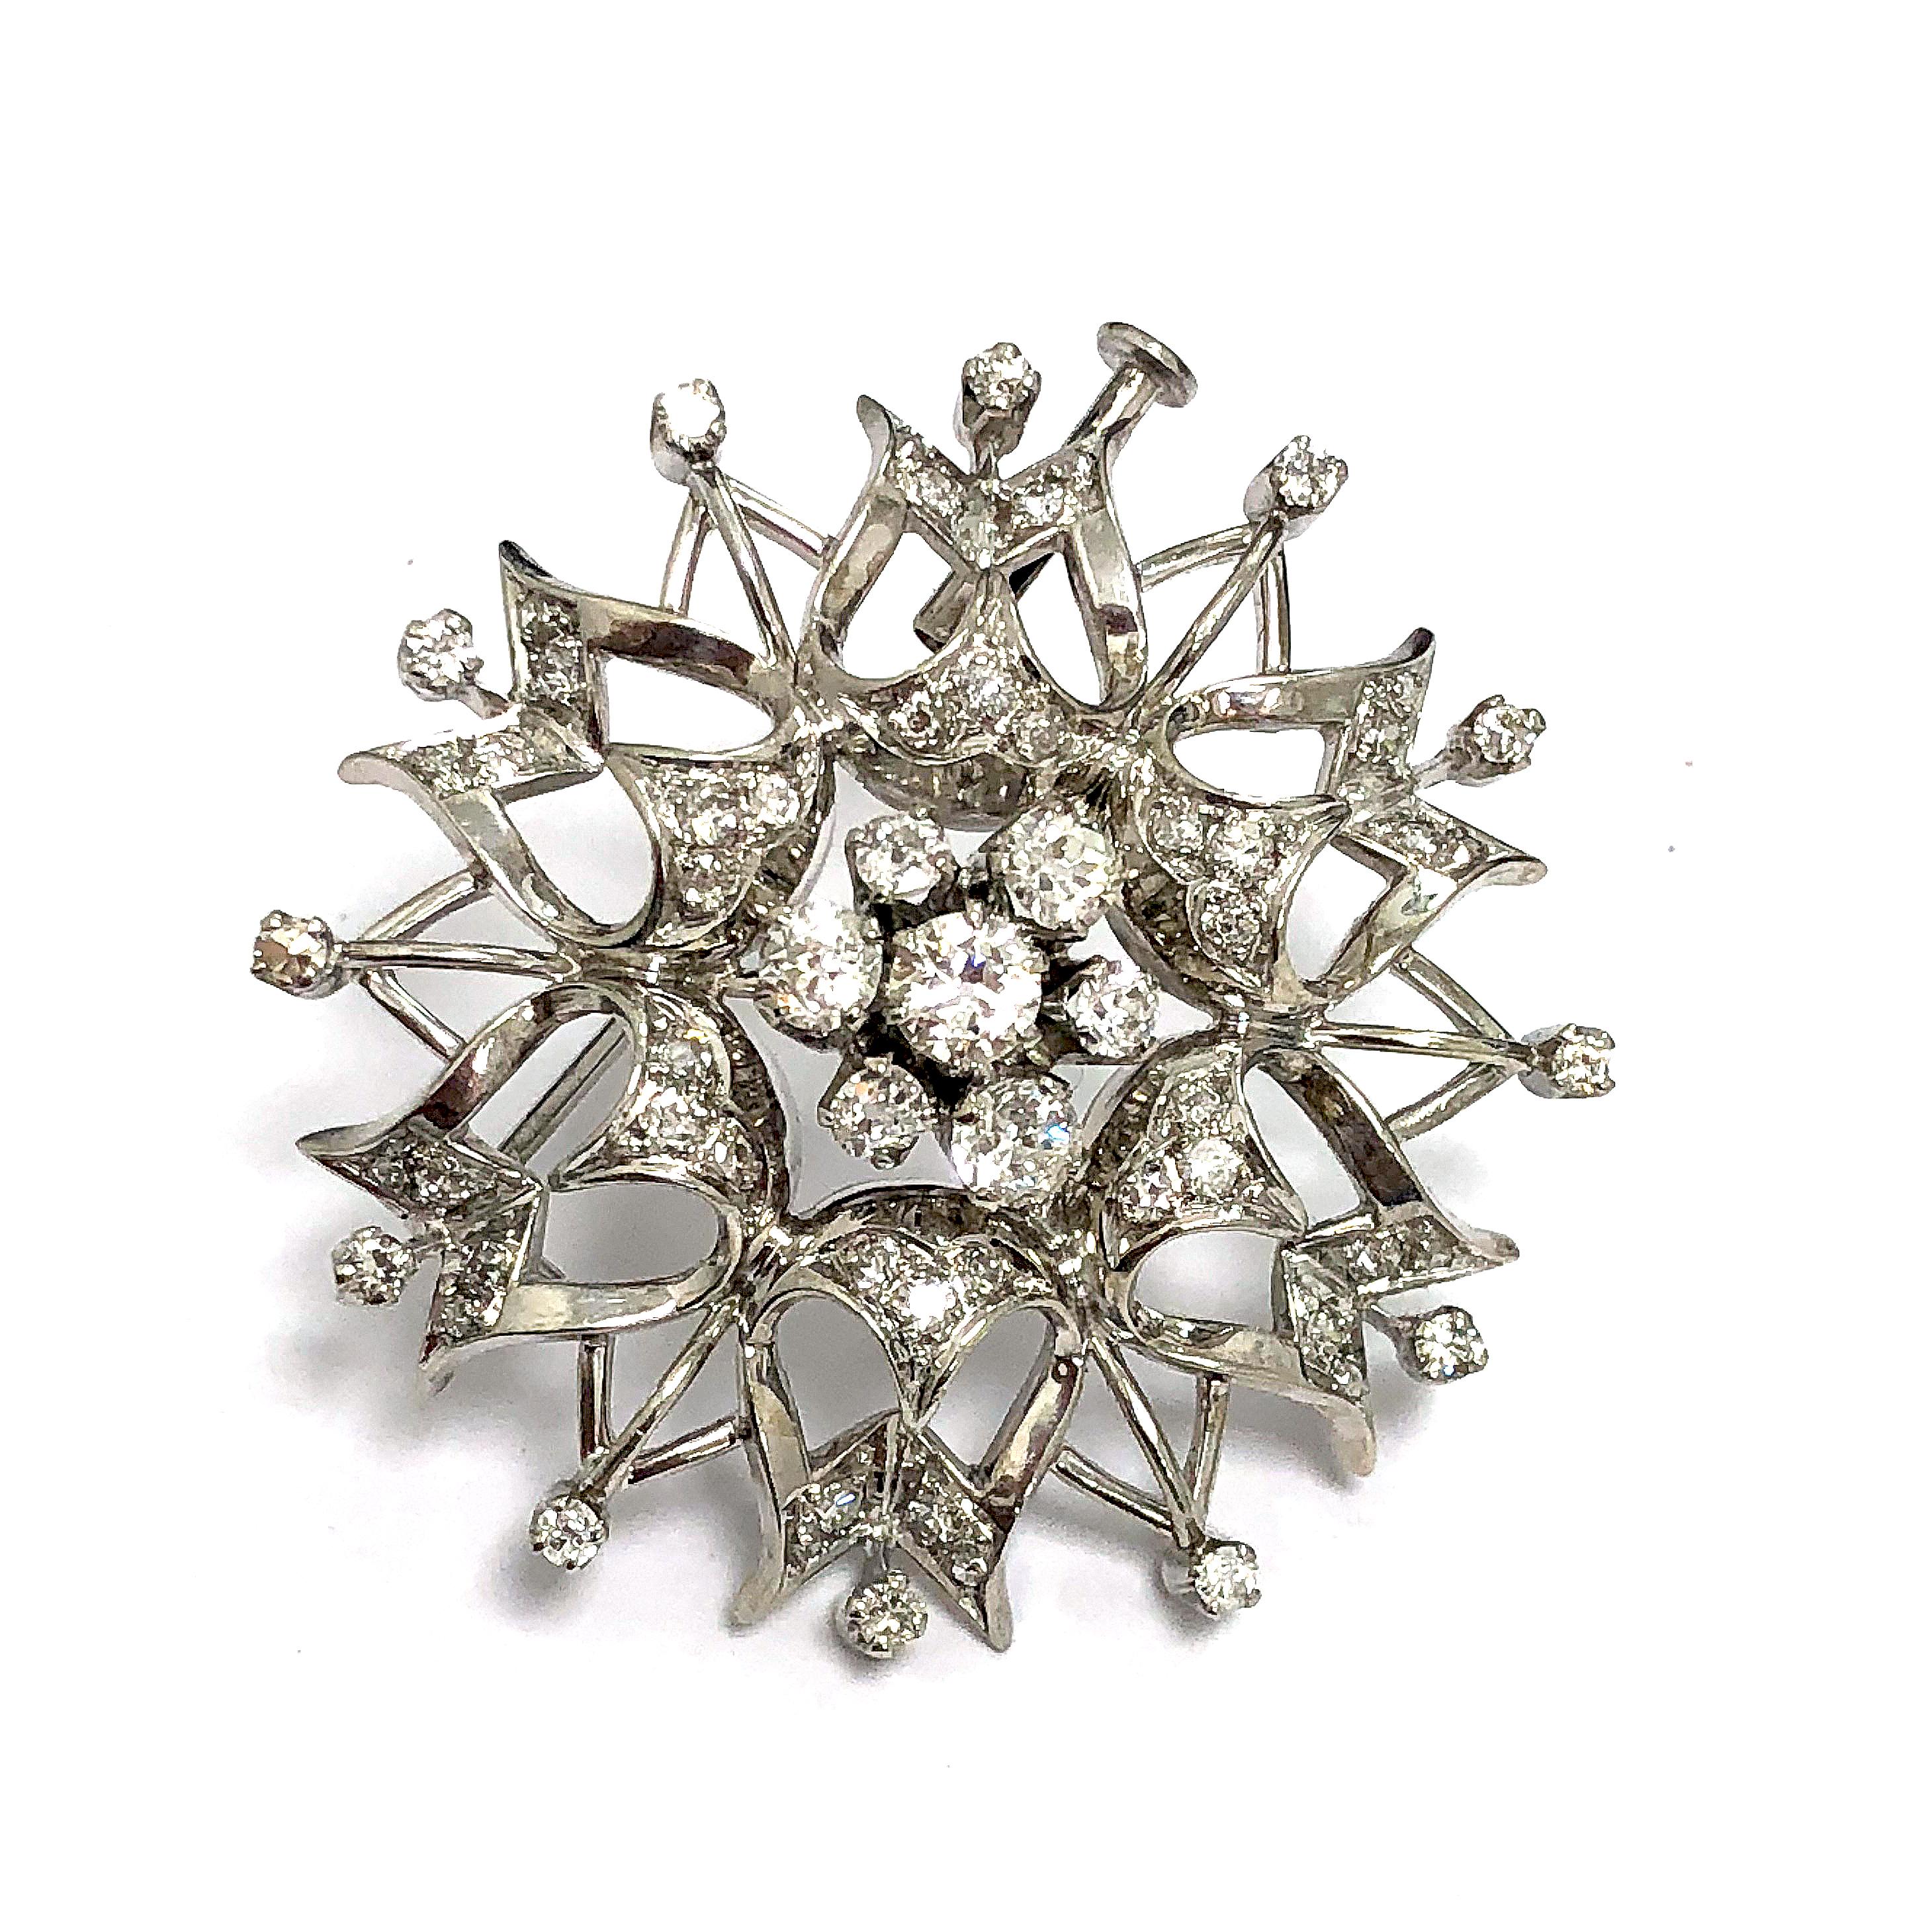 Flower shaped brooch / pin with approximately 3 carats of white diamonds. Has a length of 1.5in width and length. It is mounted in 14k White Gold.